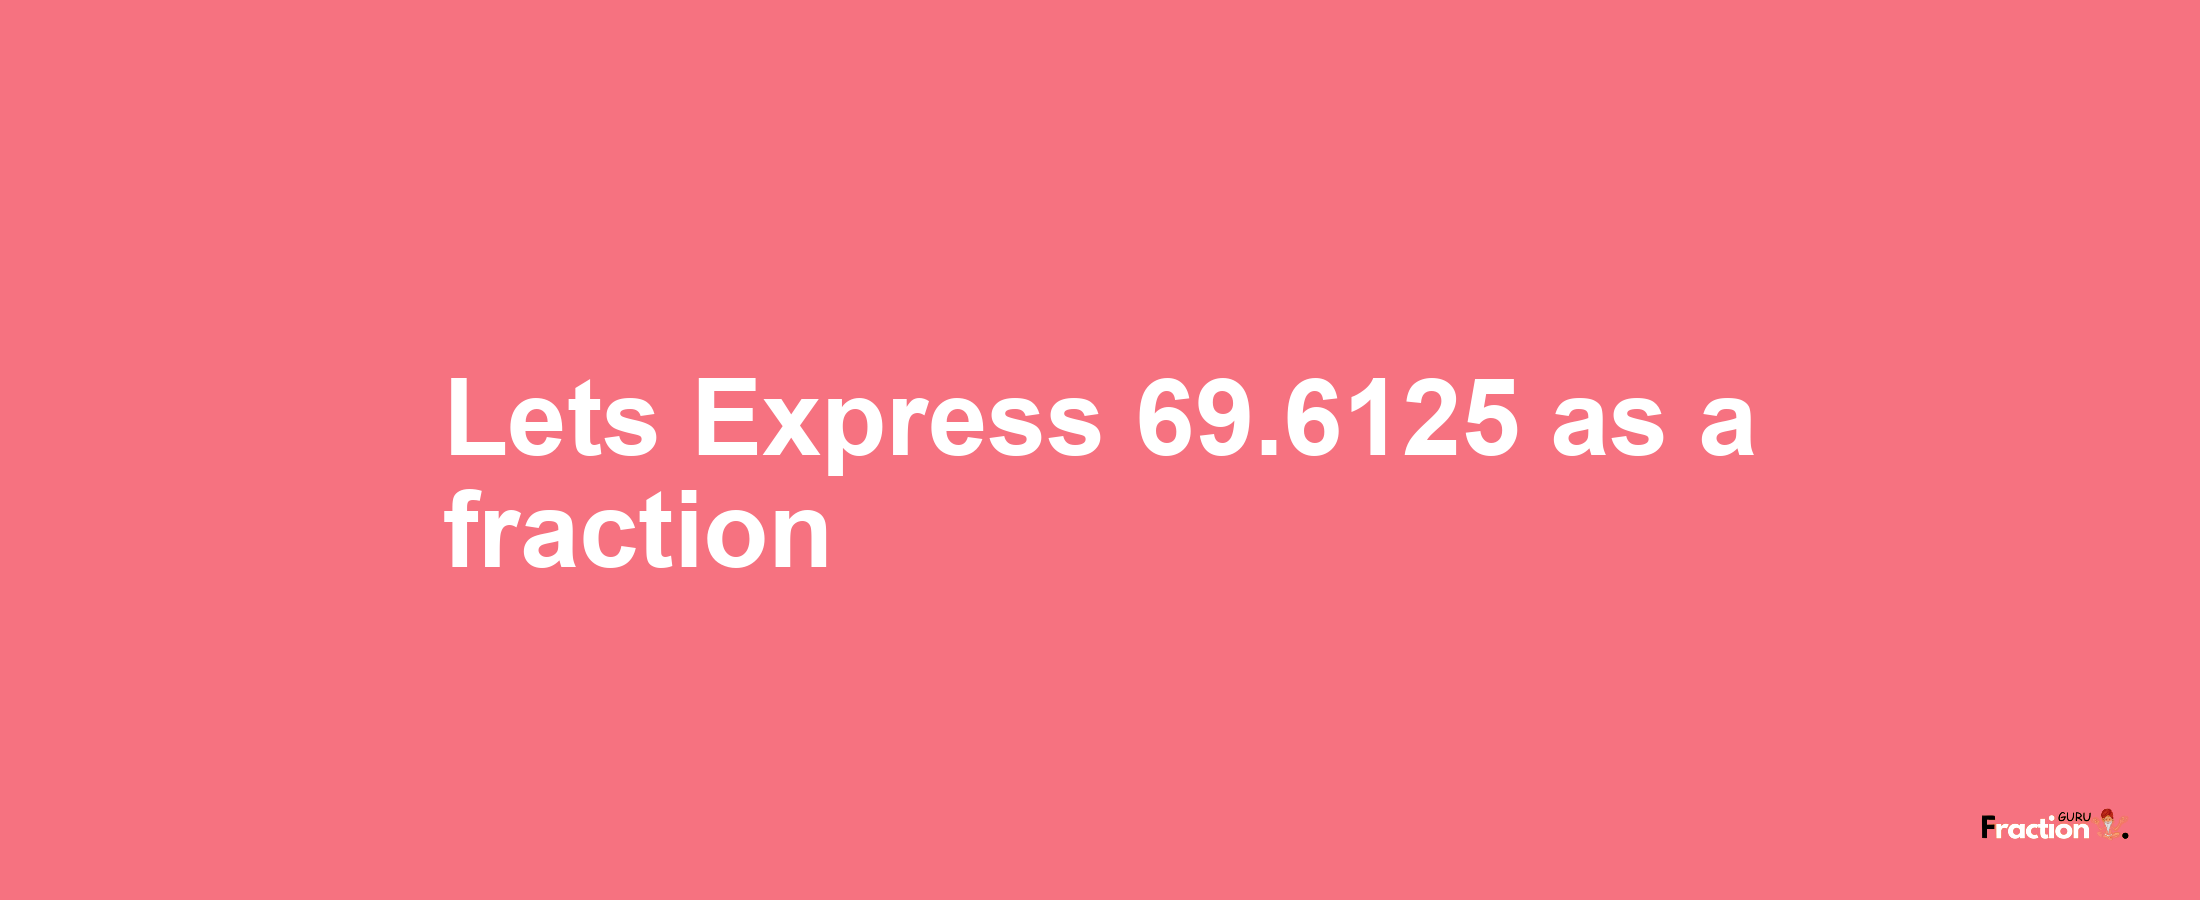 Lets Express 69.6125 as afraction